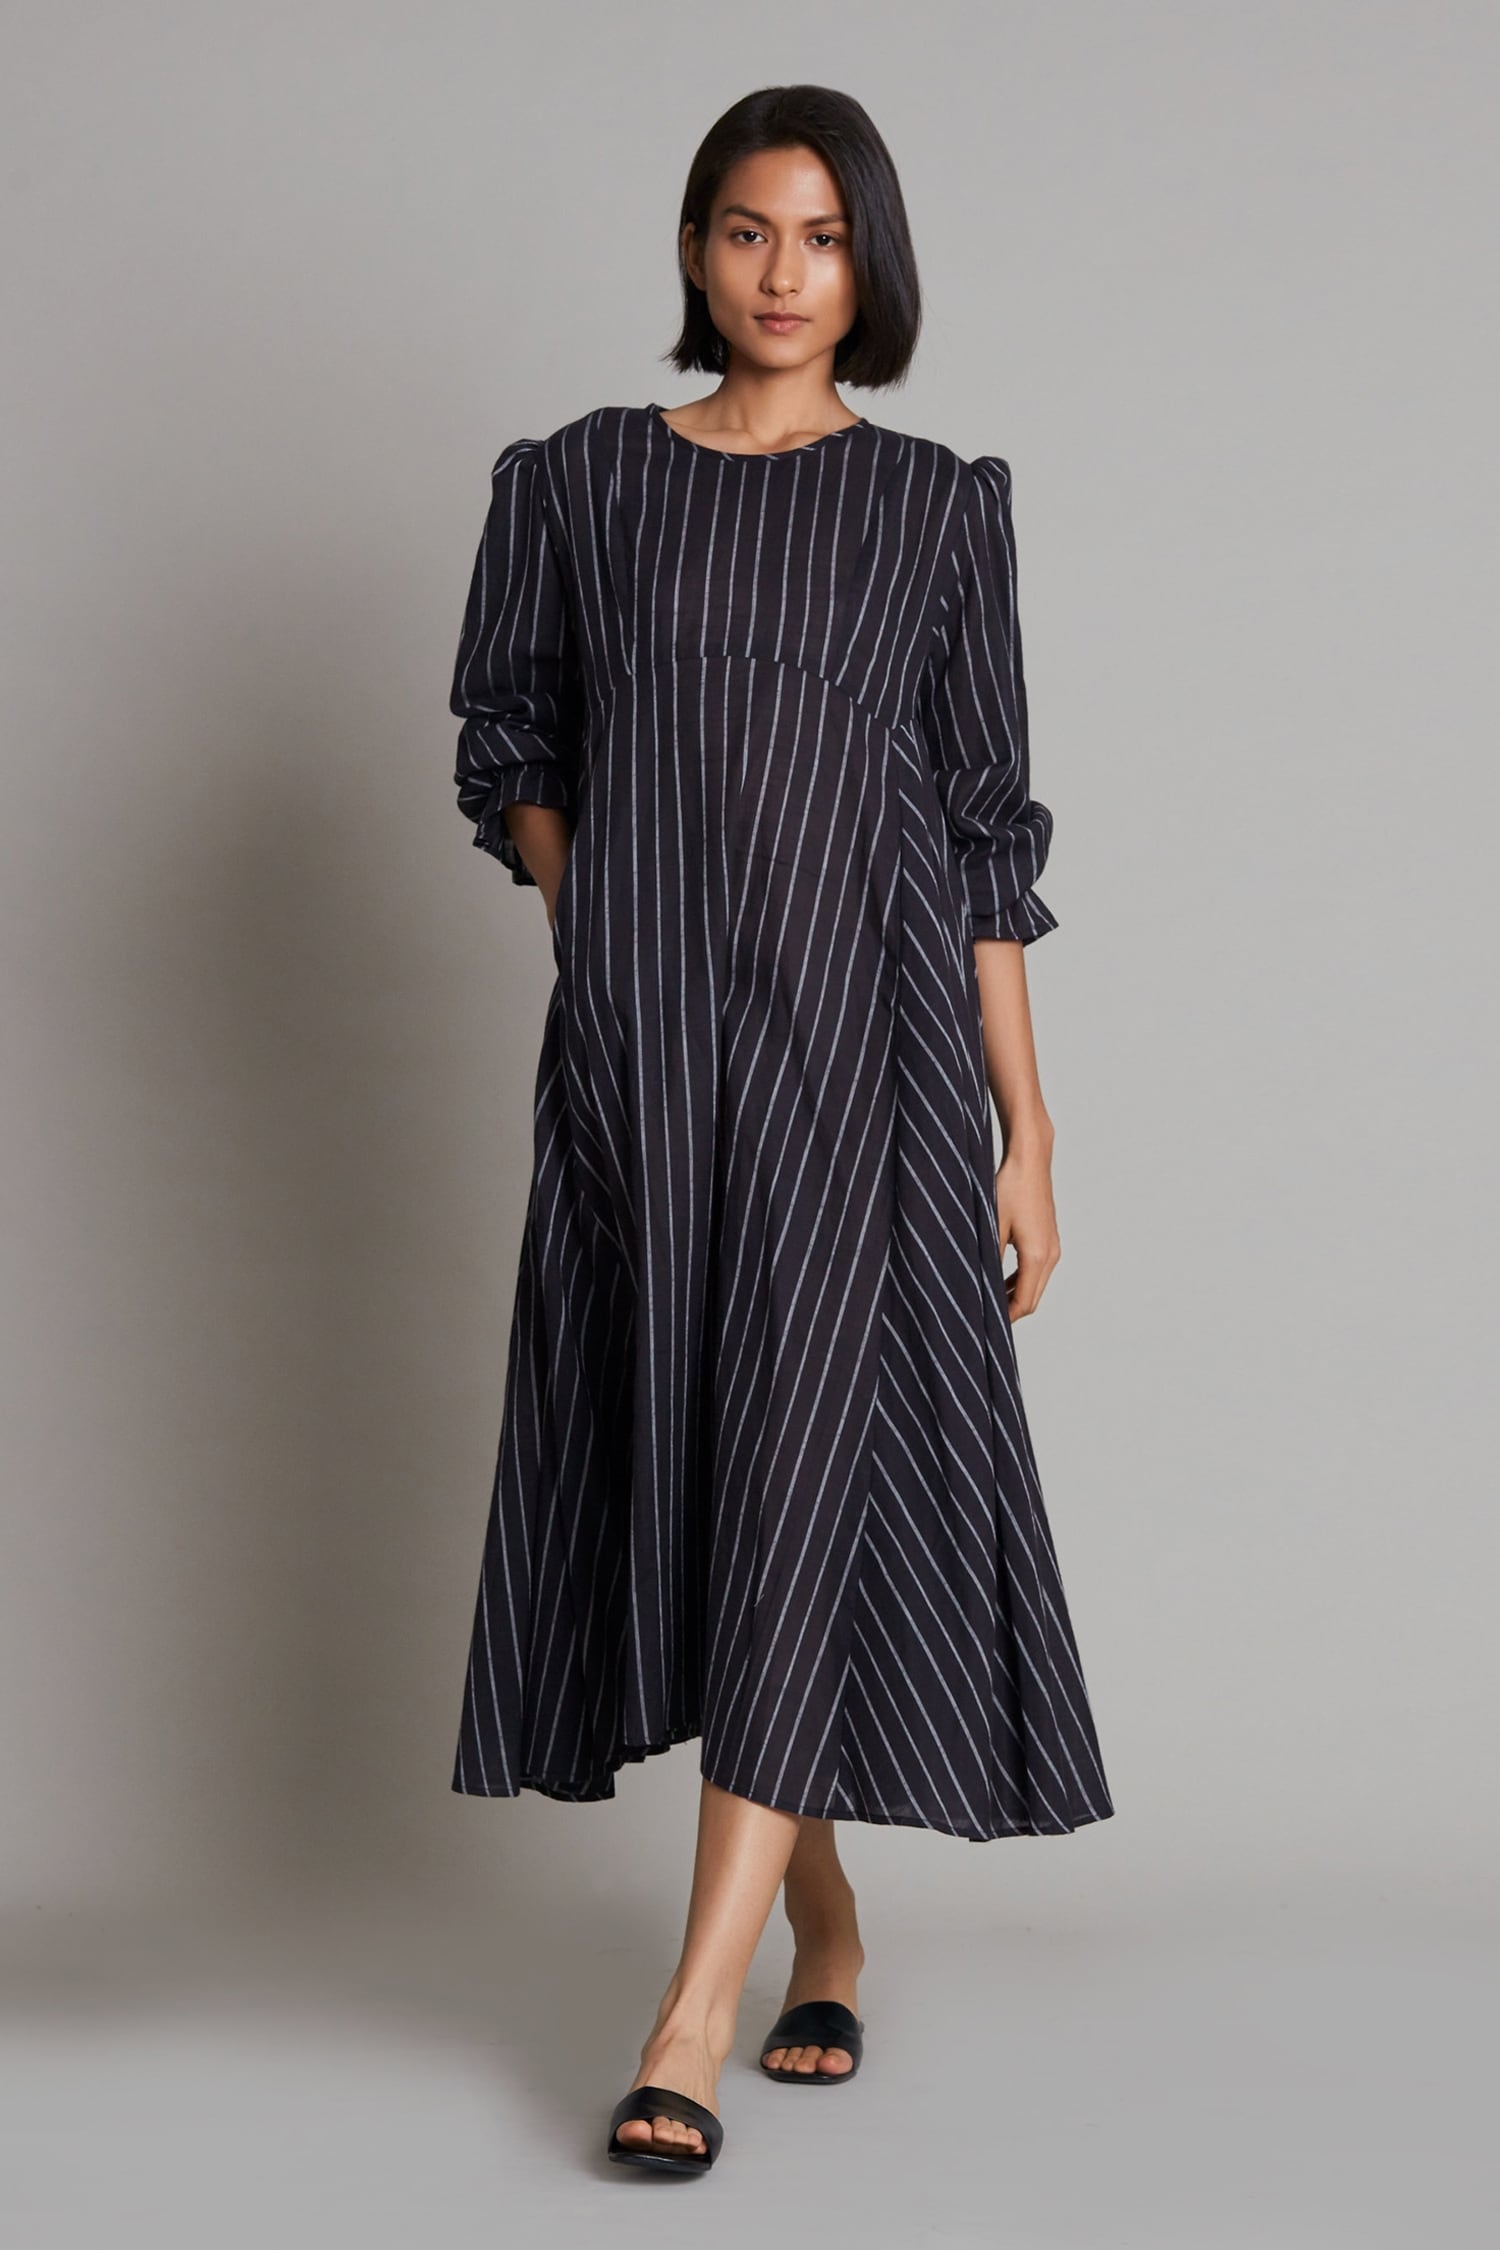 Buy Black Cotton Handwoven Round Vakra Striped Dress For Women by Mati ...